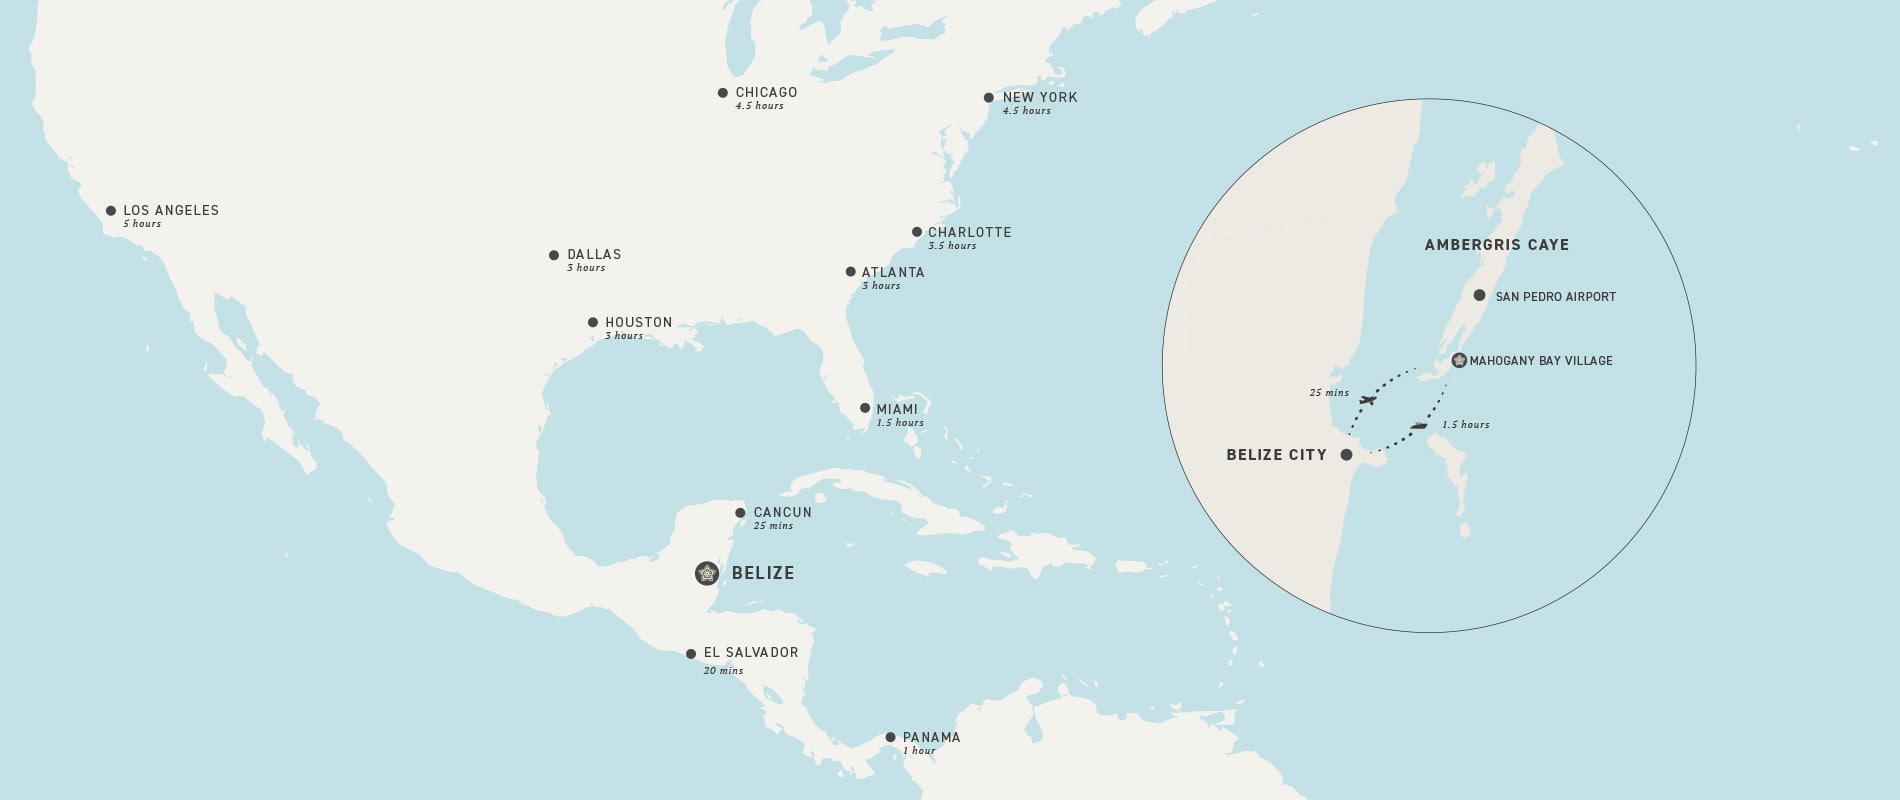 Map showing the different flying times to get to Mahogany Bay Resort in Belize